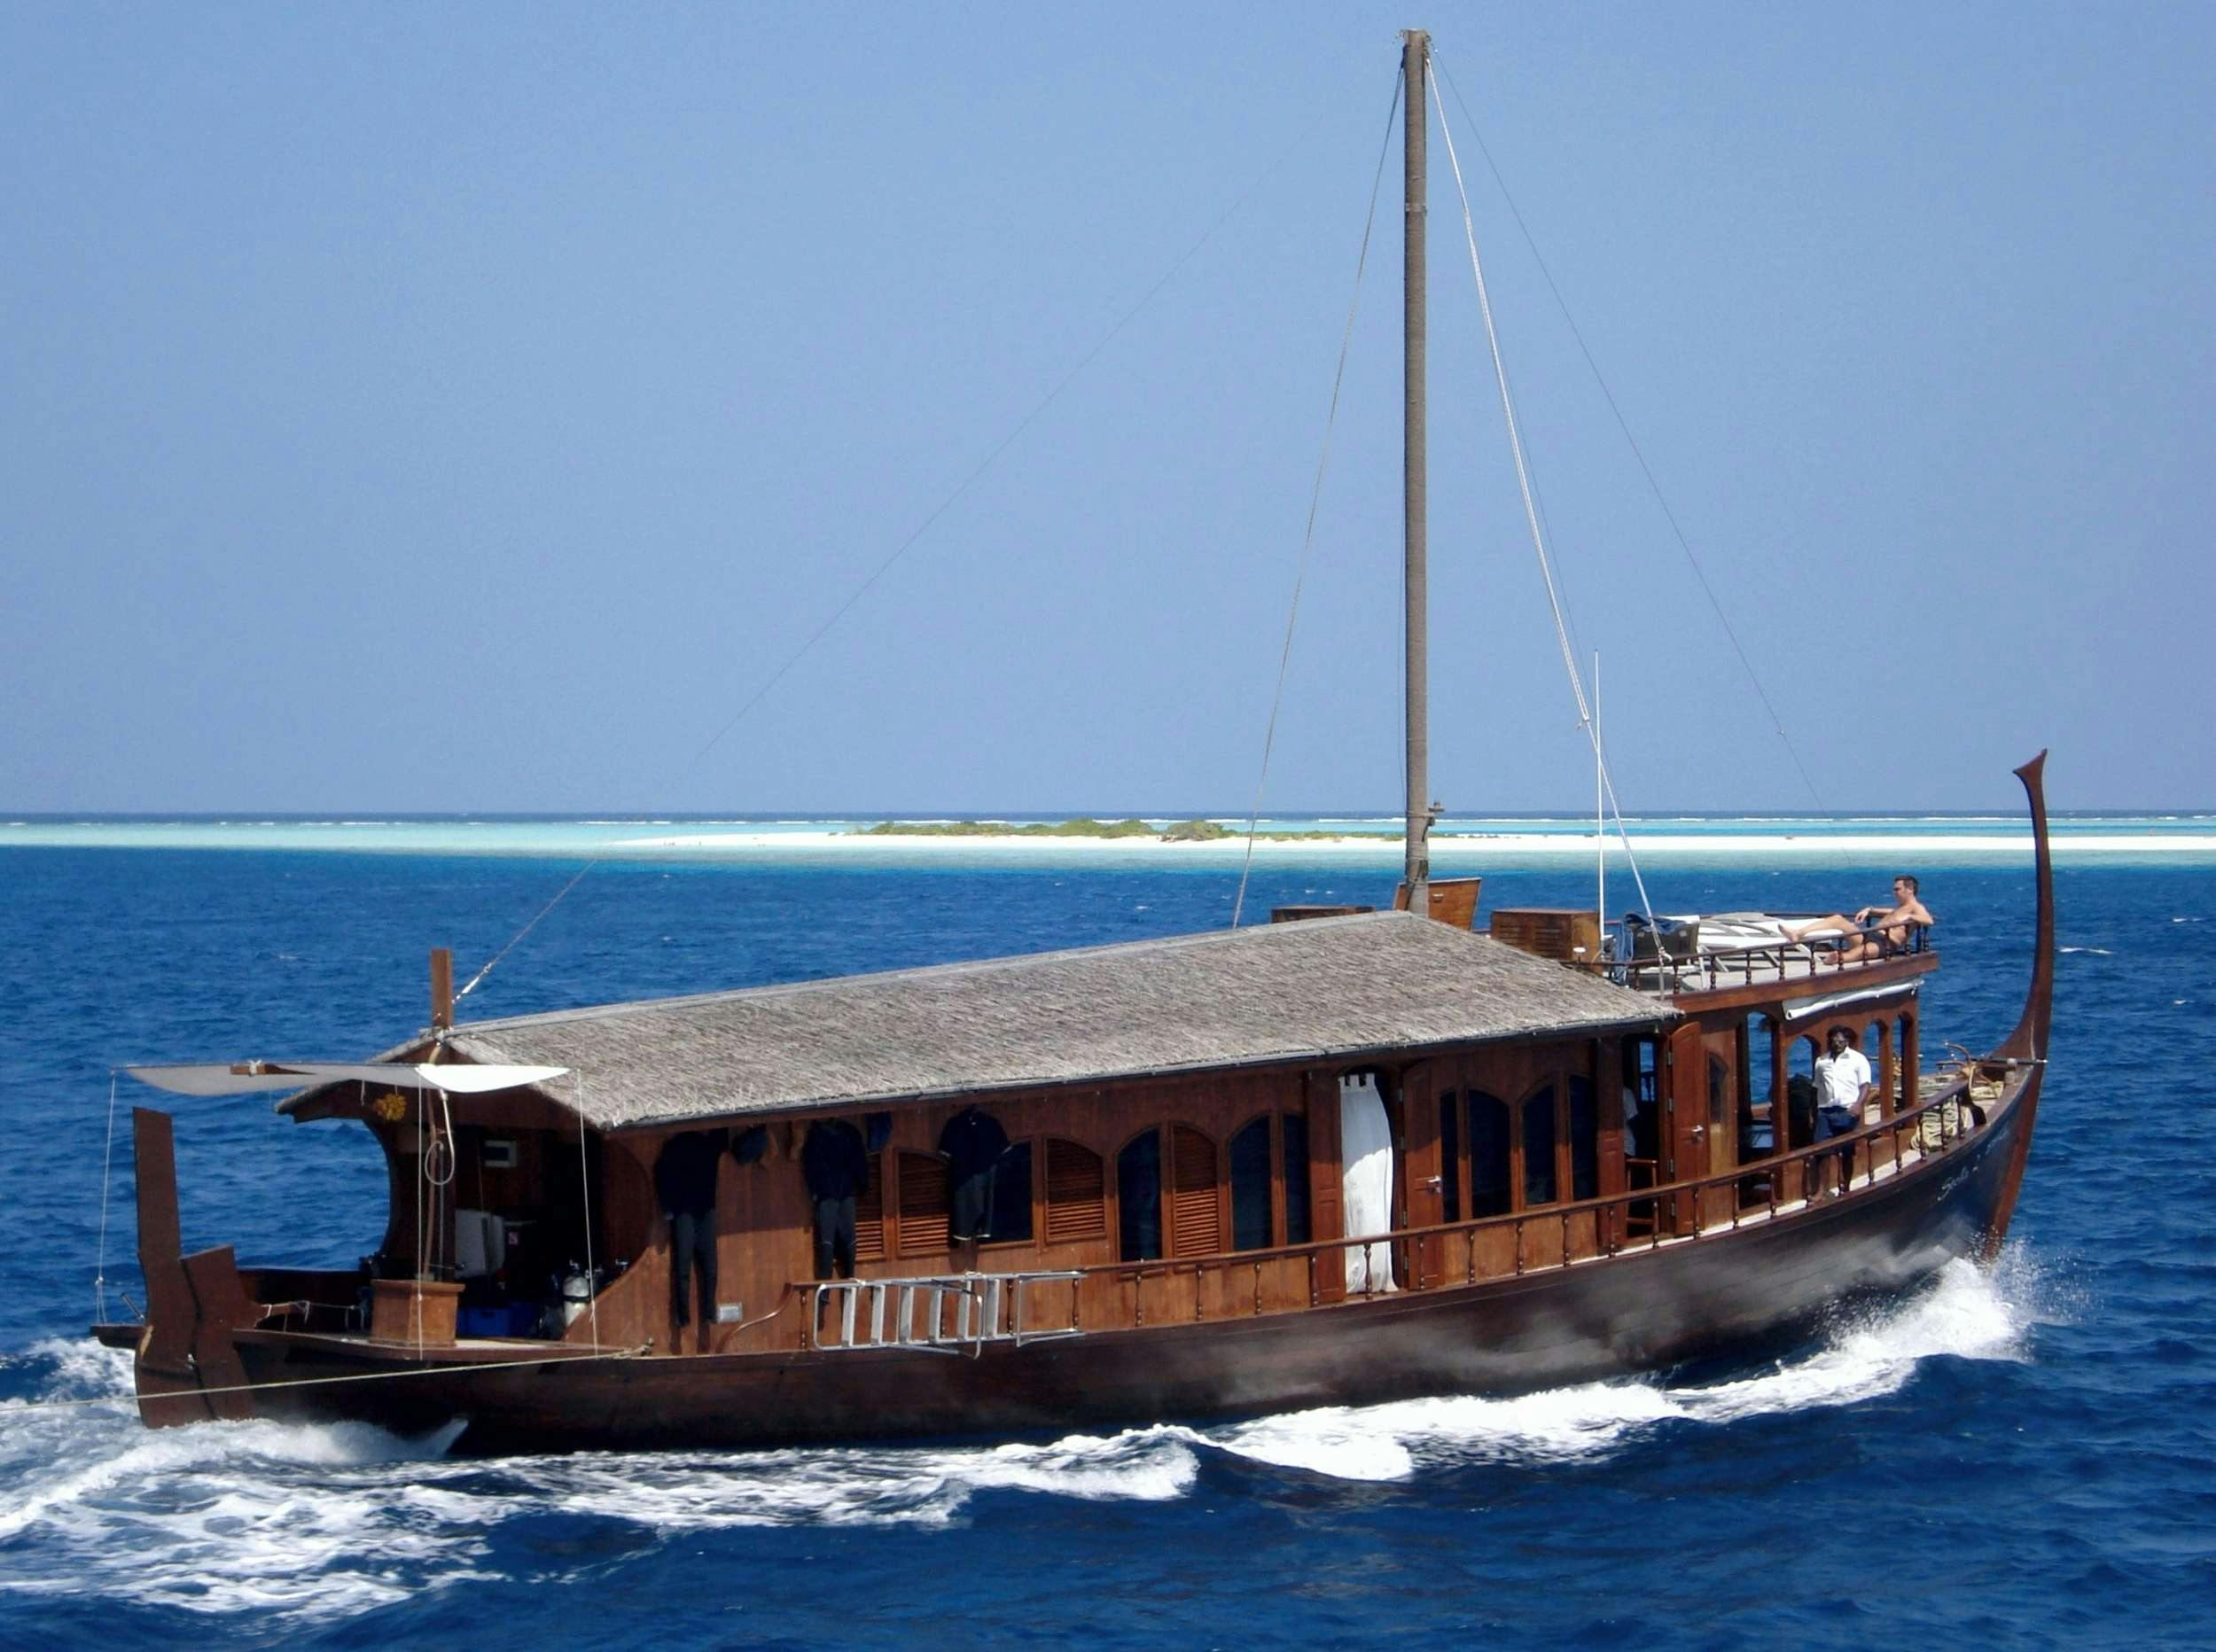 DHONI STELLA 2 - Yacht Charter Thailand & Boat hire in Indian Ocean & SE Asia 1